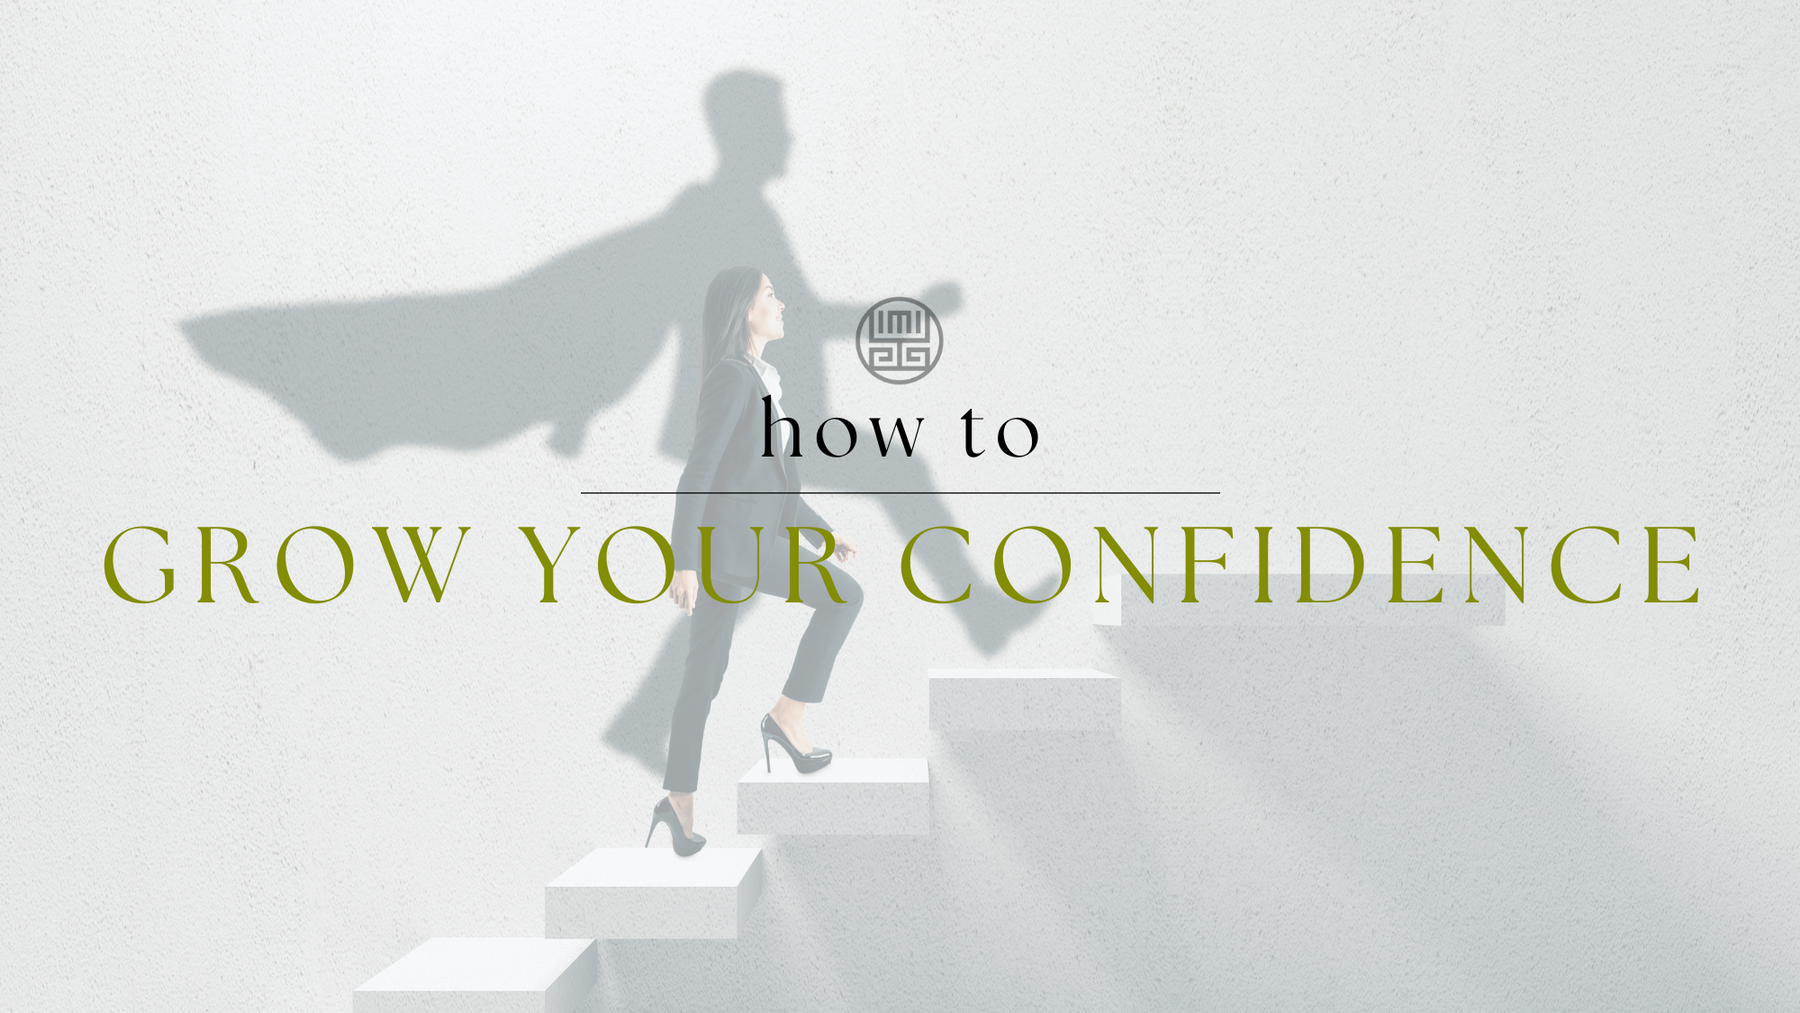 How To Grow Your Confidence